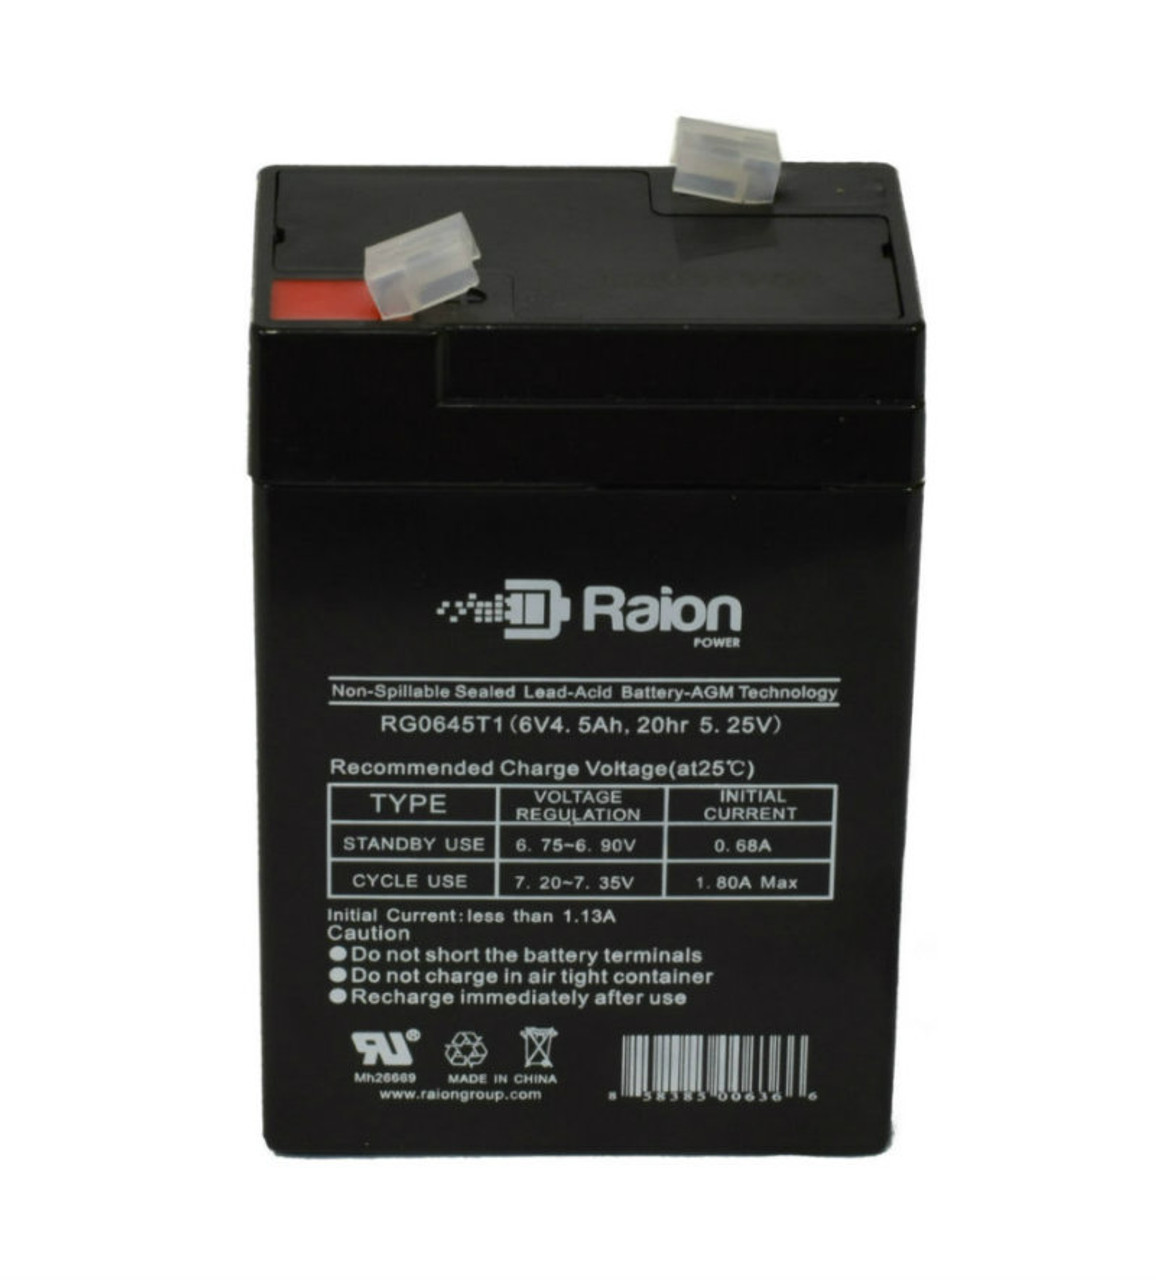 Raion Power RG0645T1 Replacement Battery Cartridge for Ademco 25389